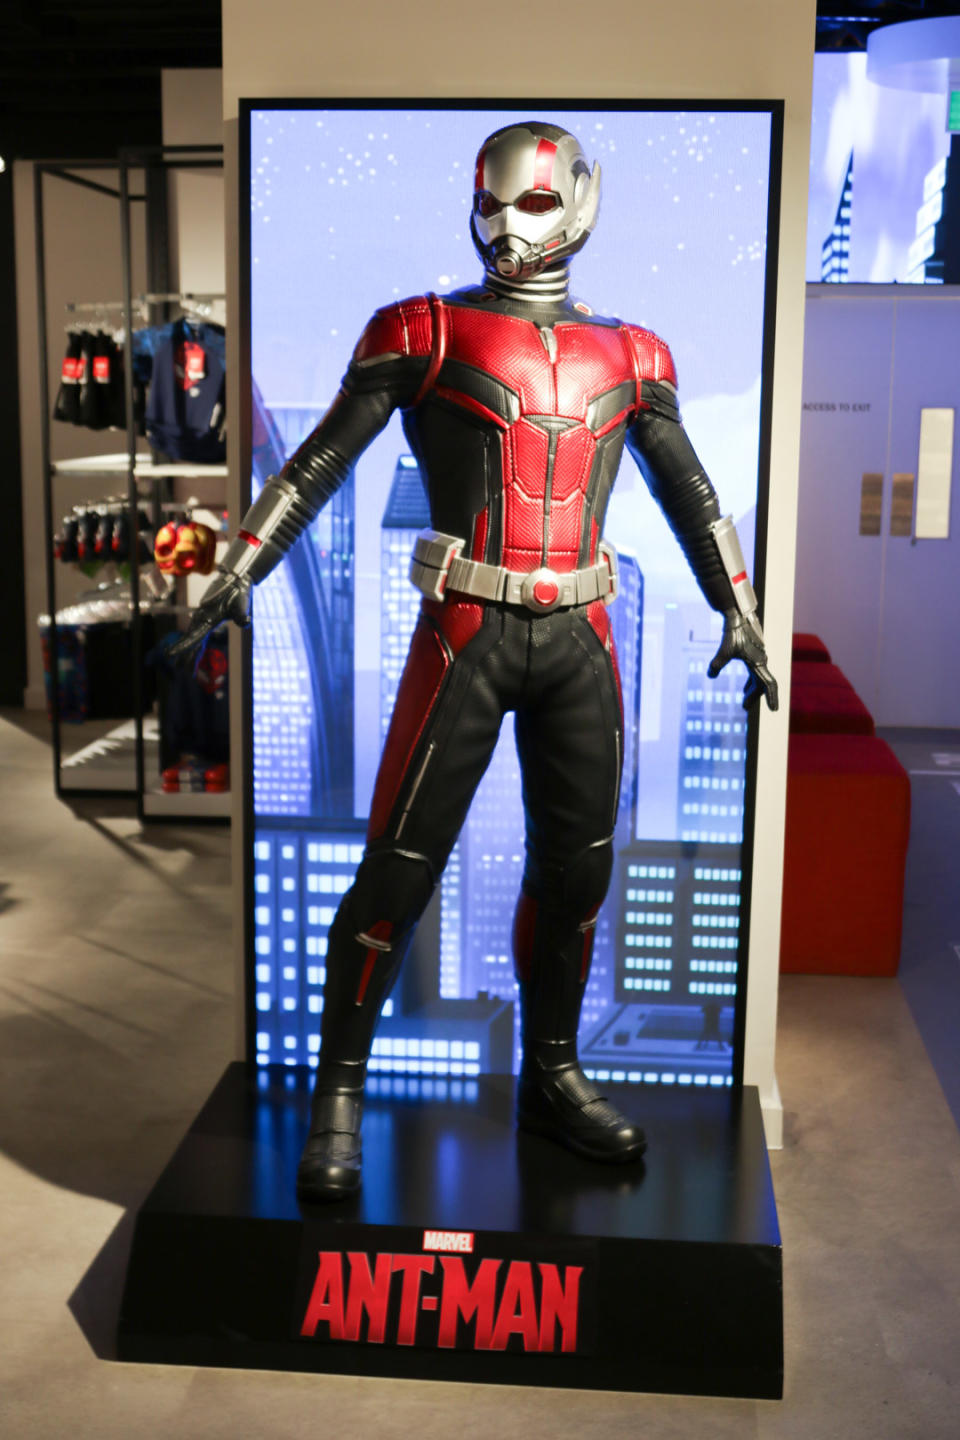 Look, it’s Ant-Man! Image: Supplied